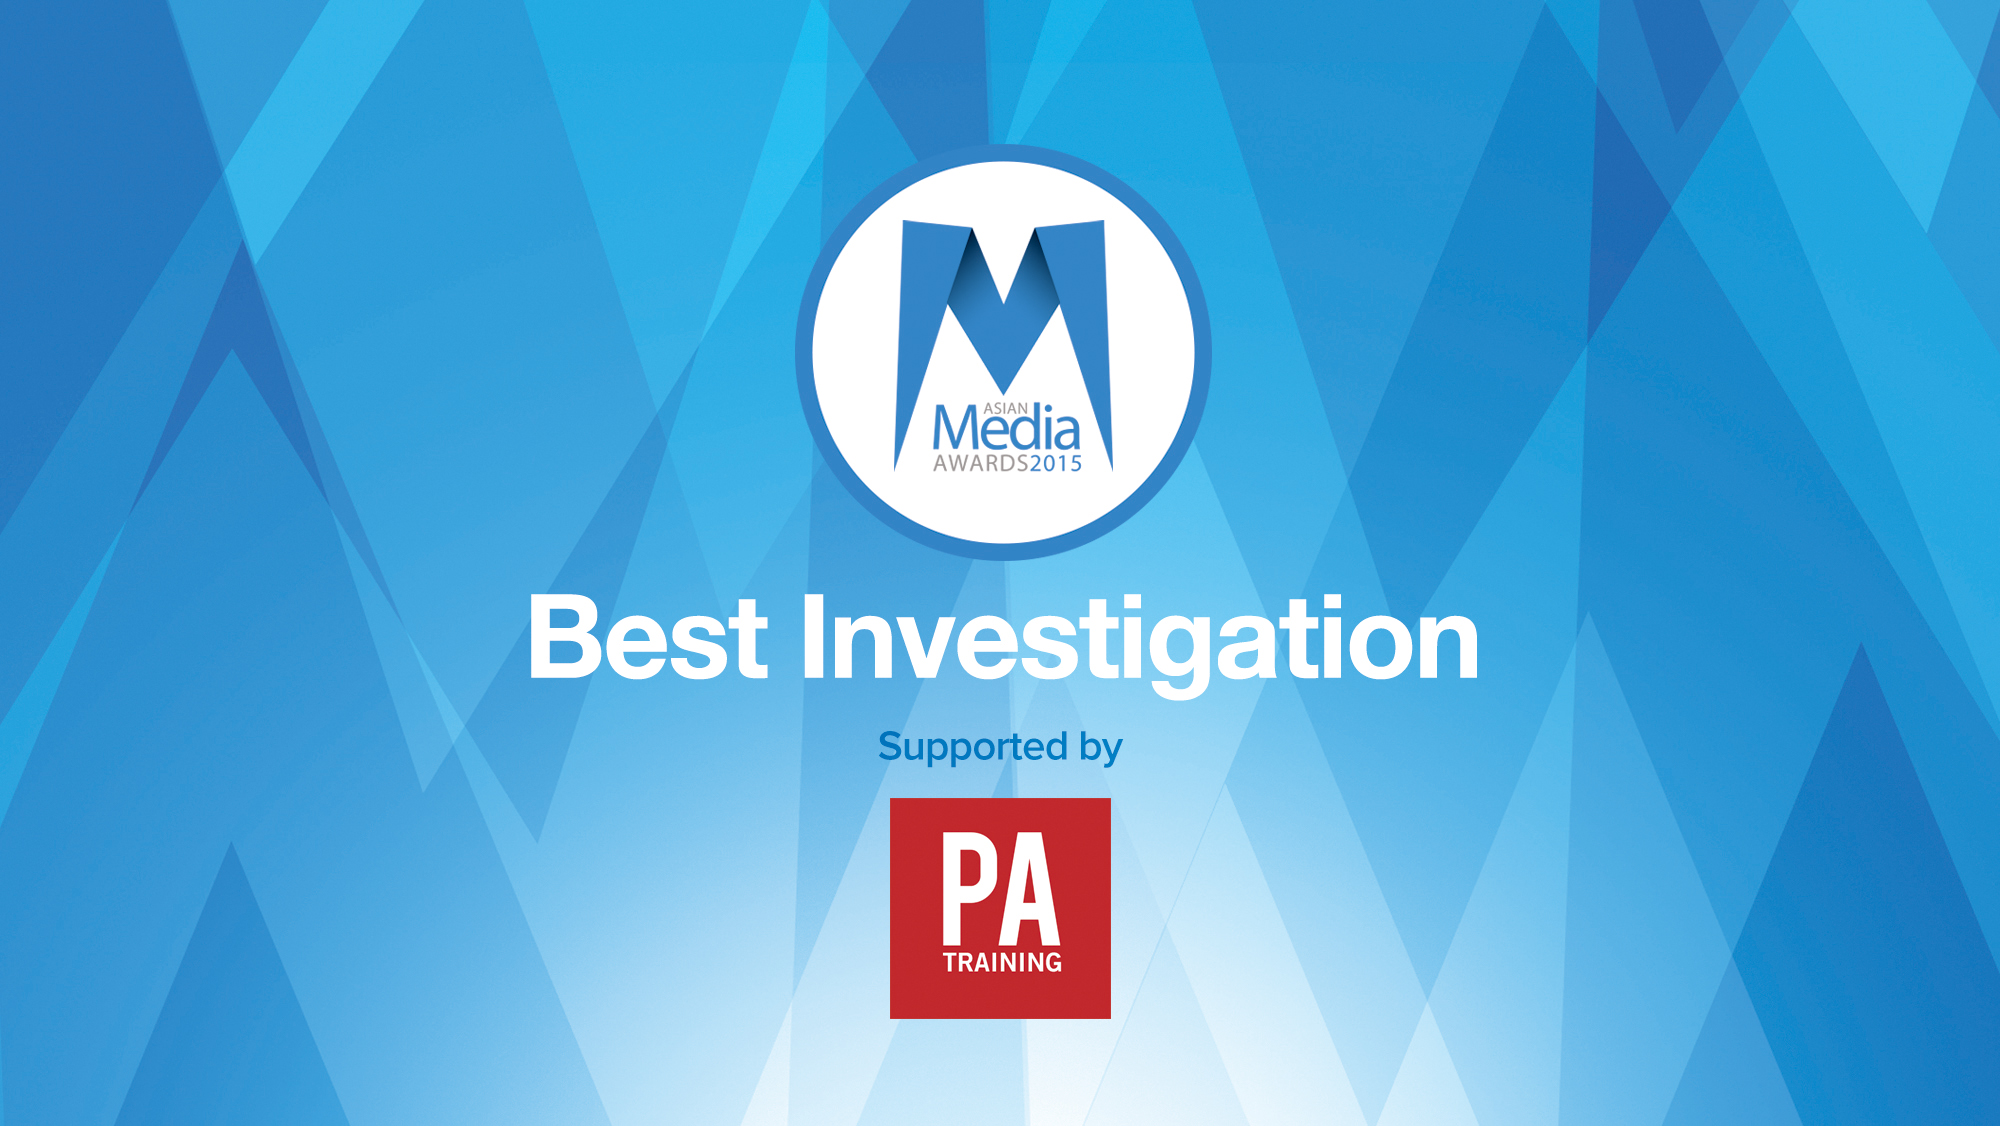 Hard Hitting Journalism Features In This Year’s Best Investigation Category